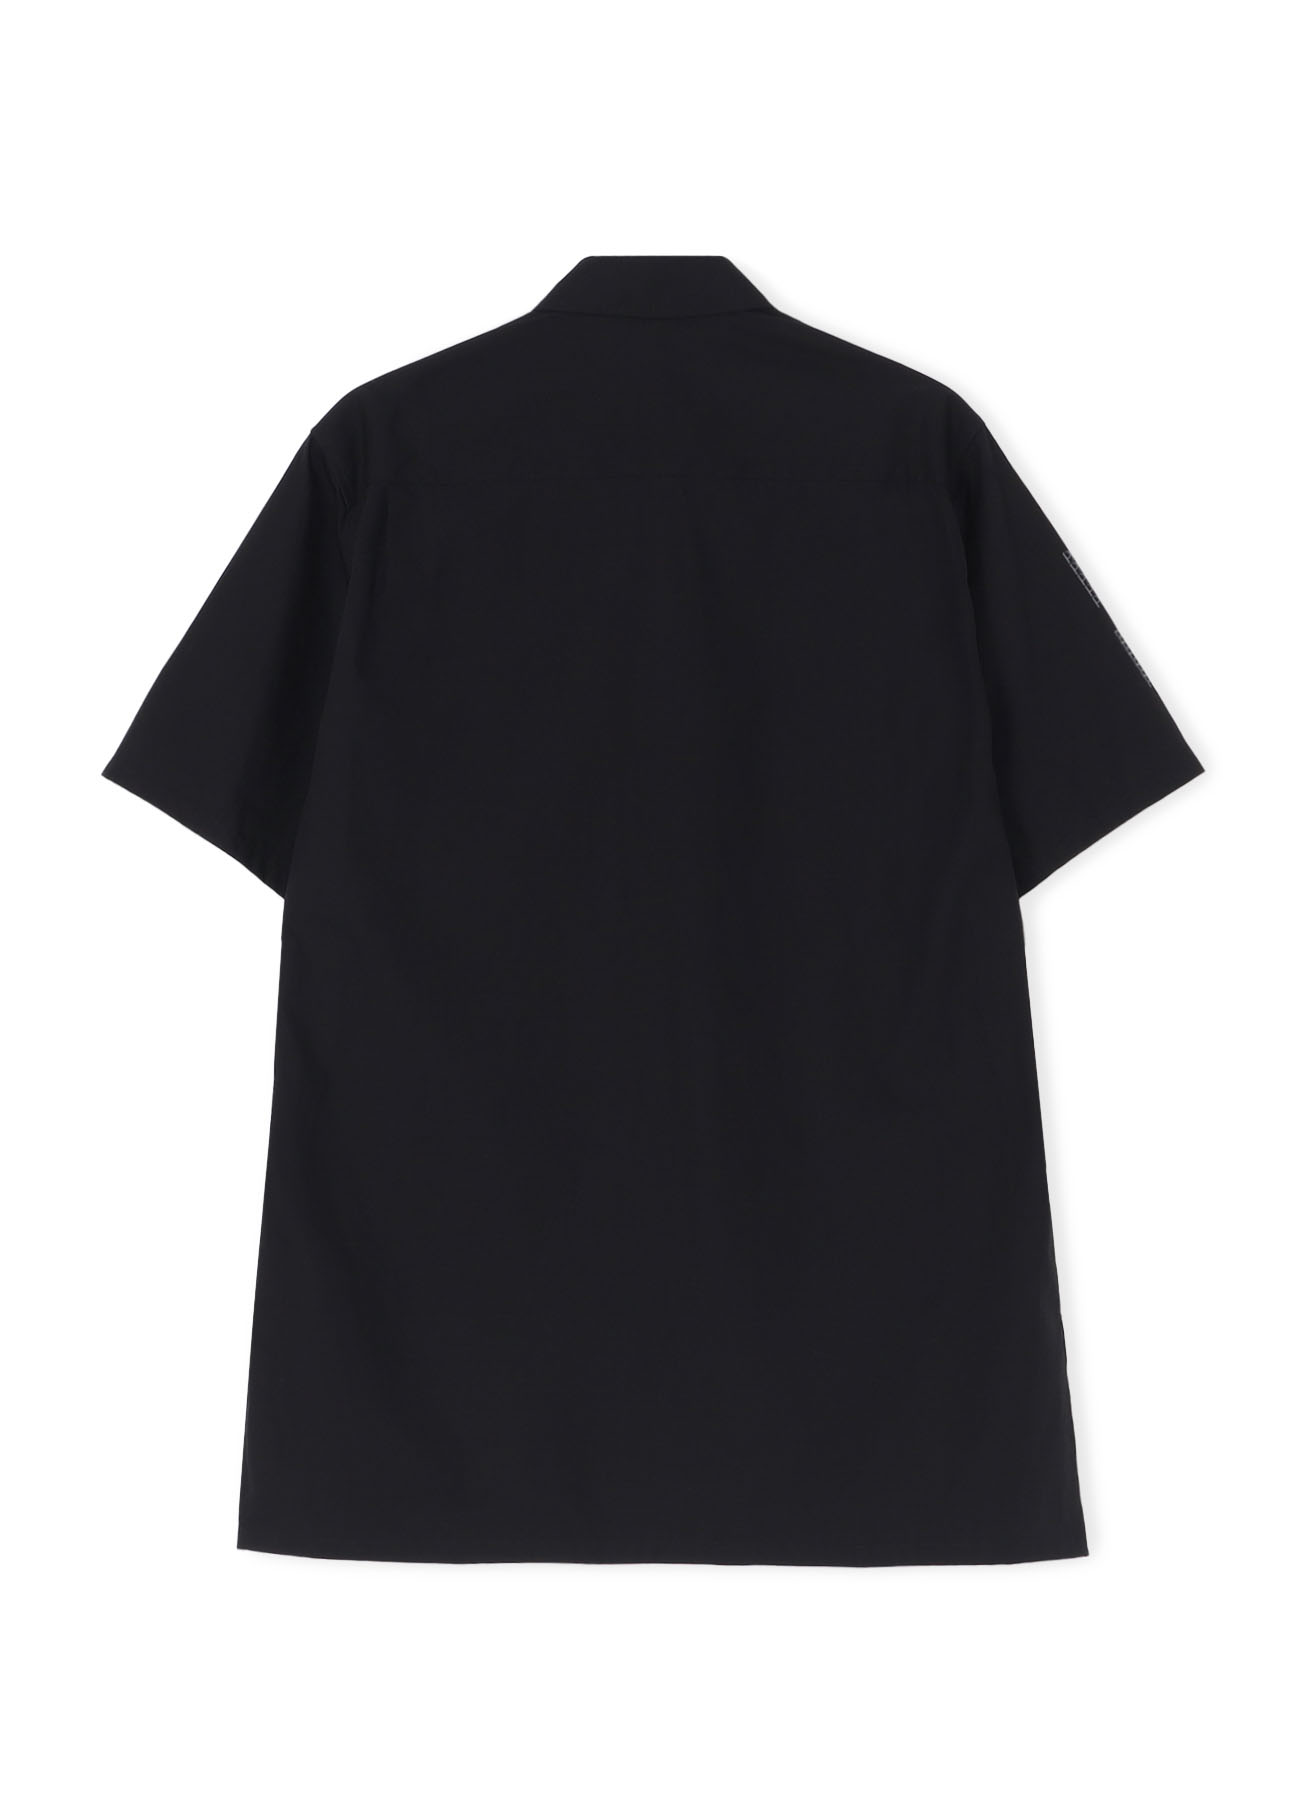 【PARCO 50th LIMITED】HALF SLEEVE SHIRT